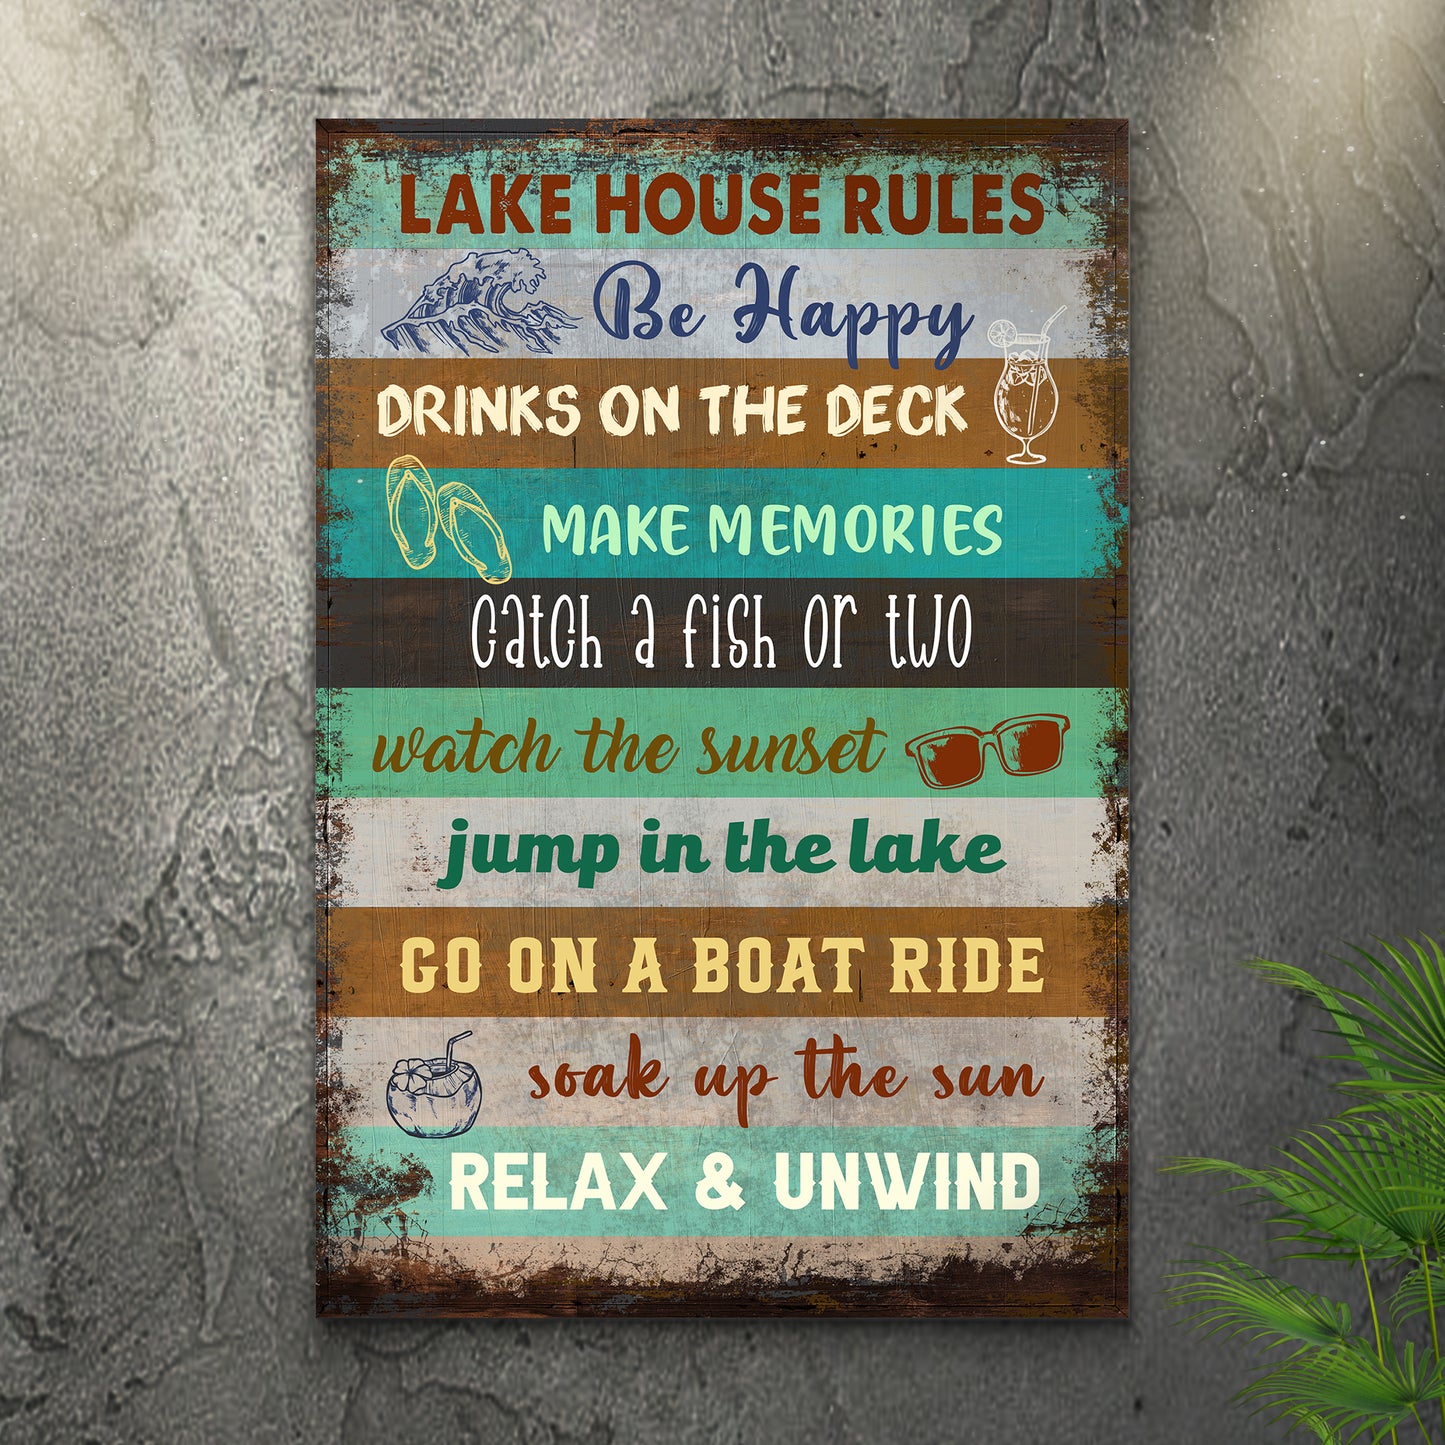 Lake House Rules Sign III - Image by Tailored Canvases